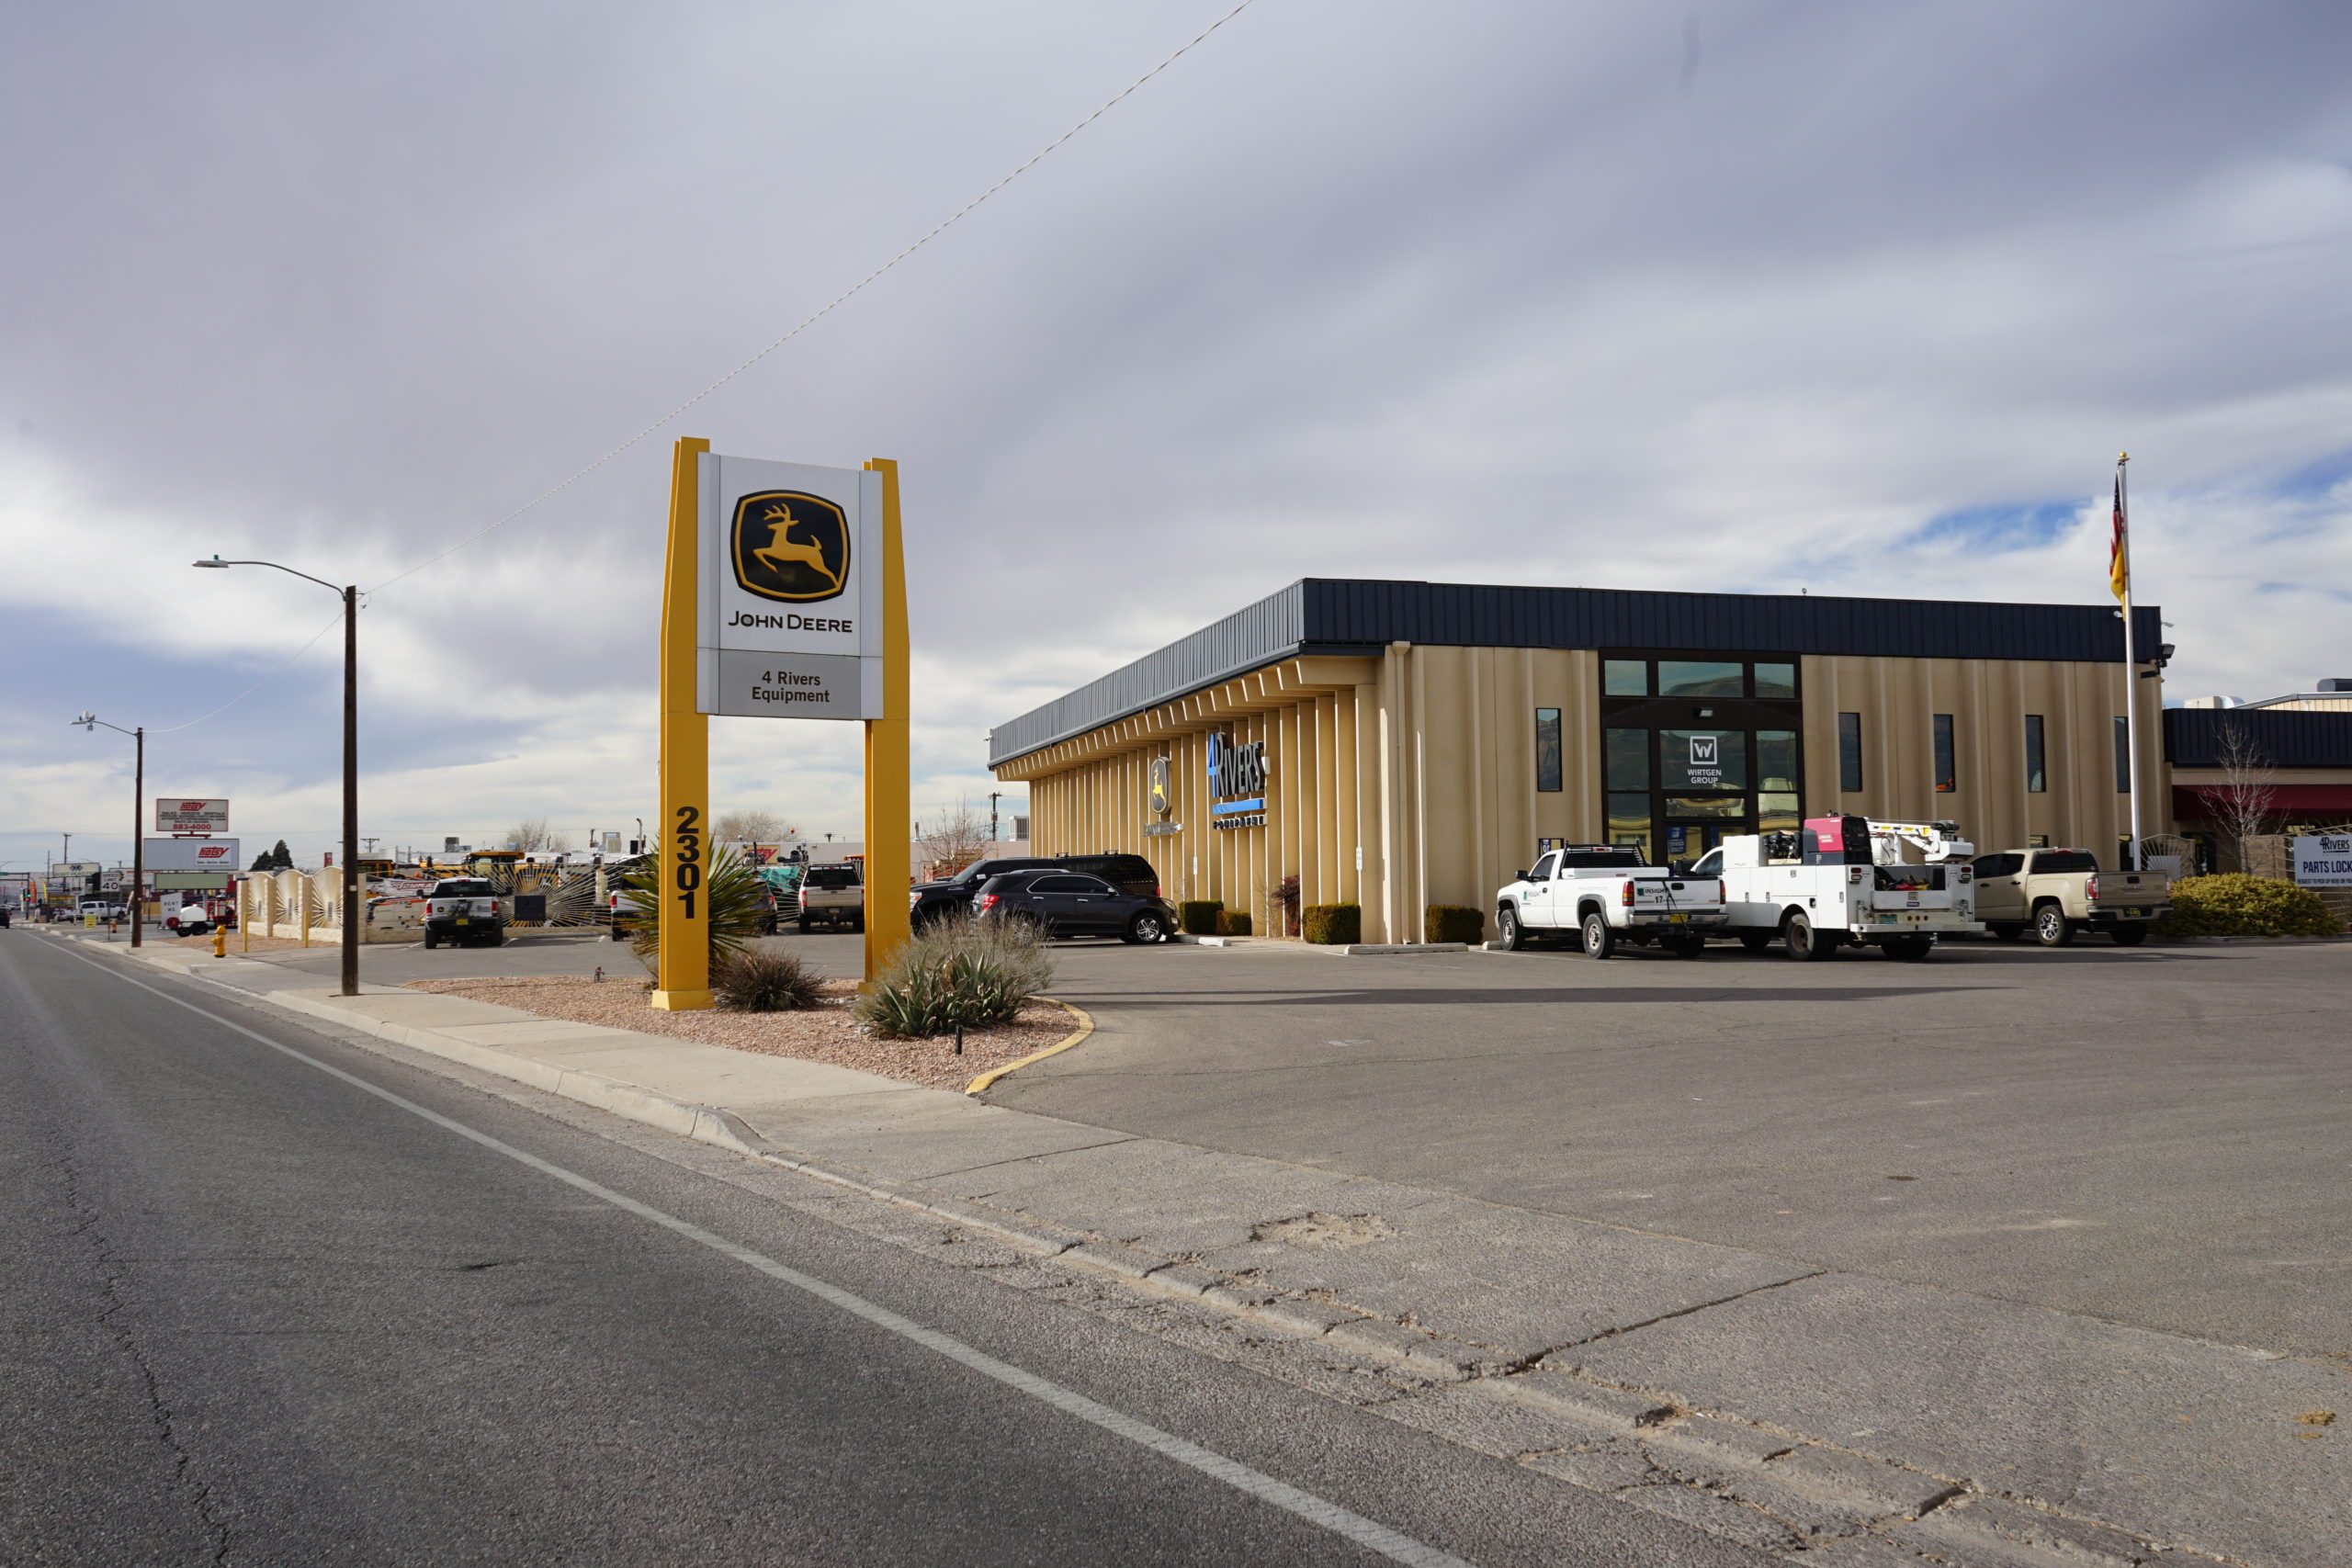 4Rivers Albuquerque location provides industry leading John Deere construction equipment solutions and support.